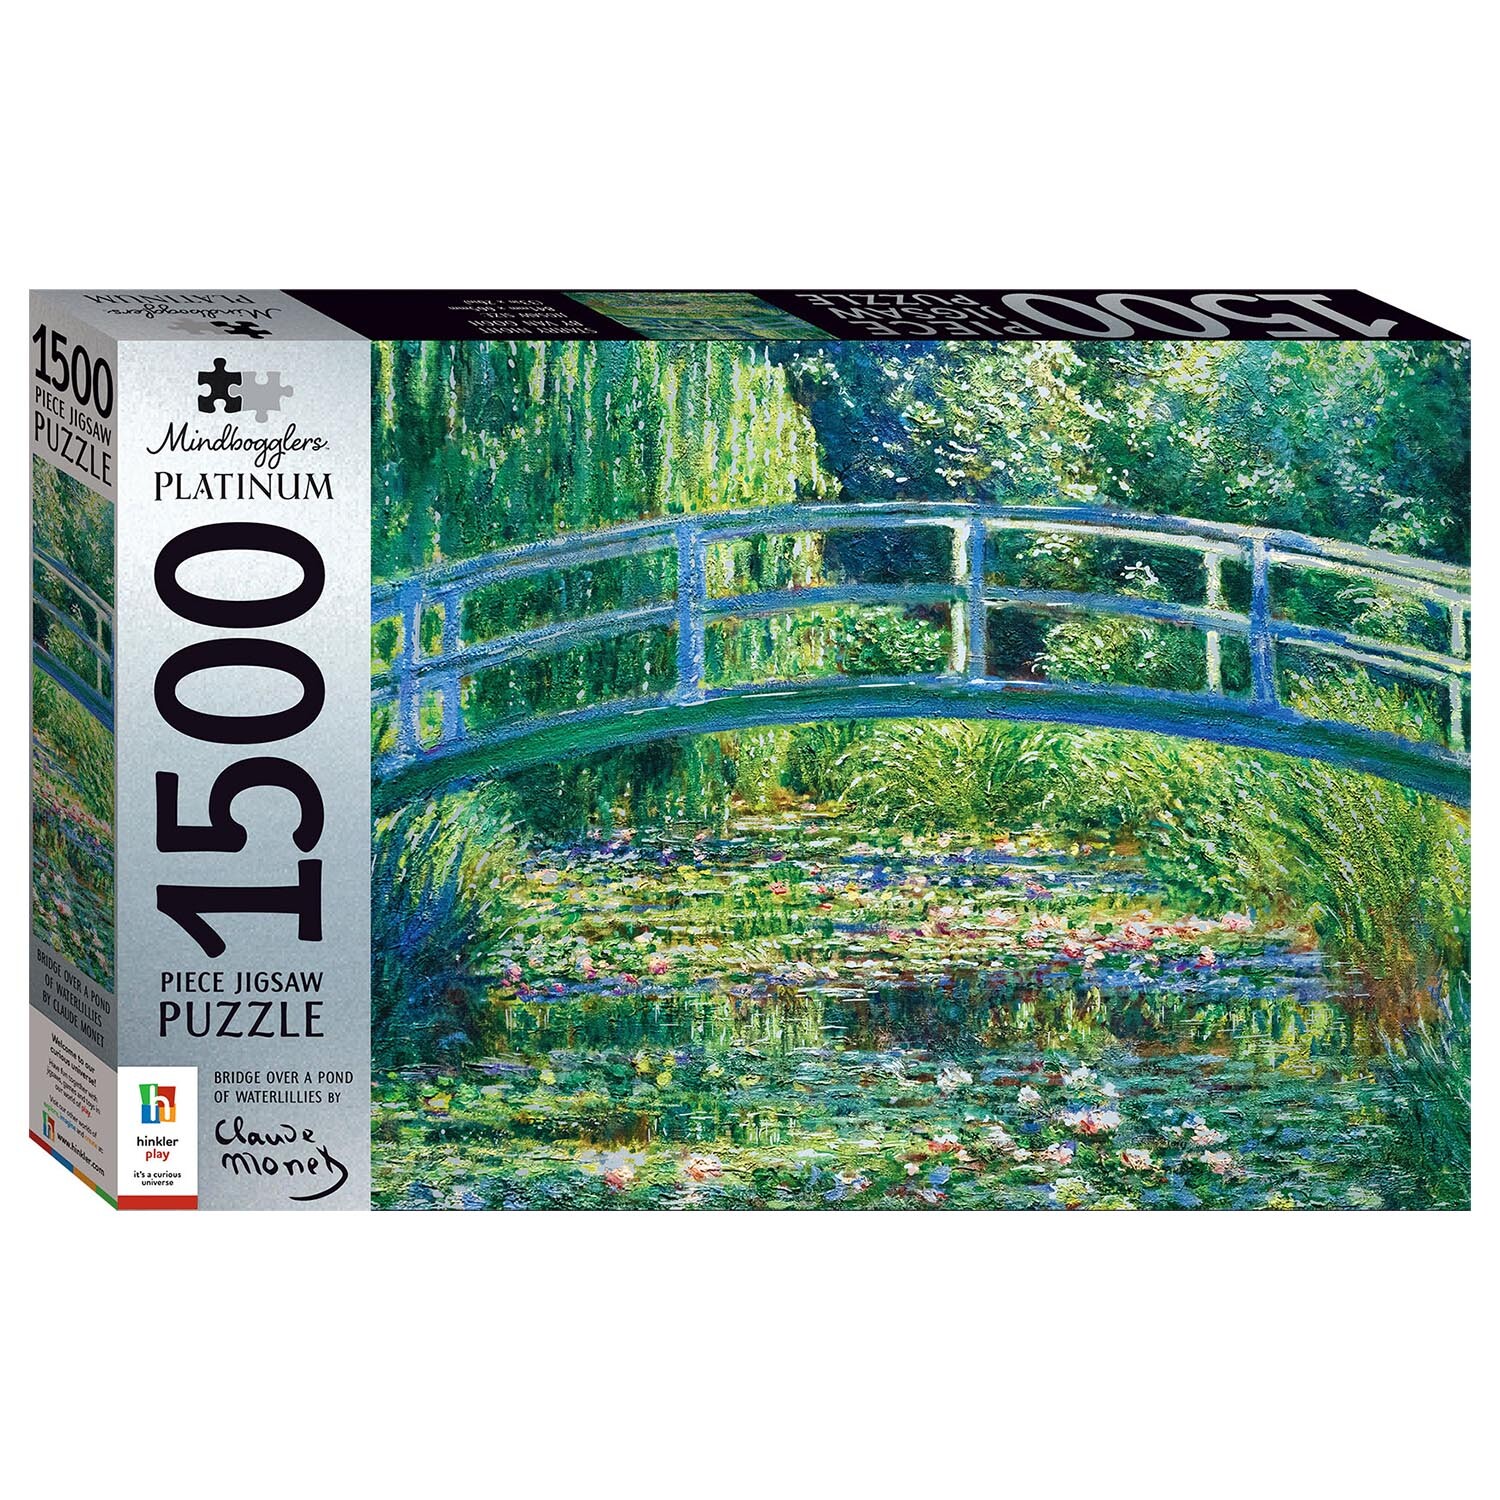 Hinkler Bridge Over a Pond of Waterlilies Puzzle 1500 Piece Image